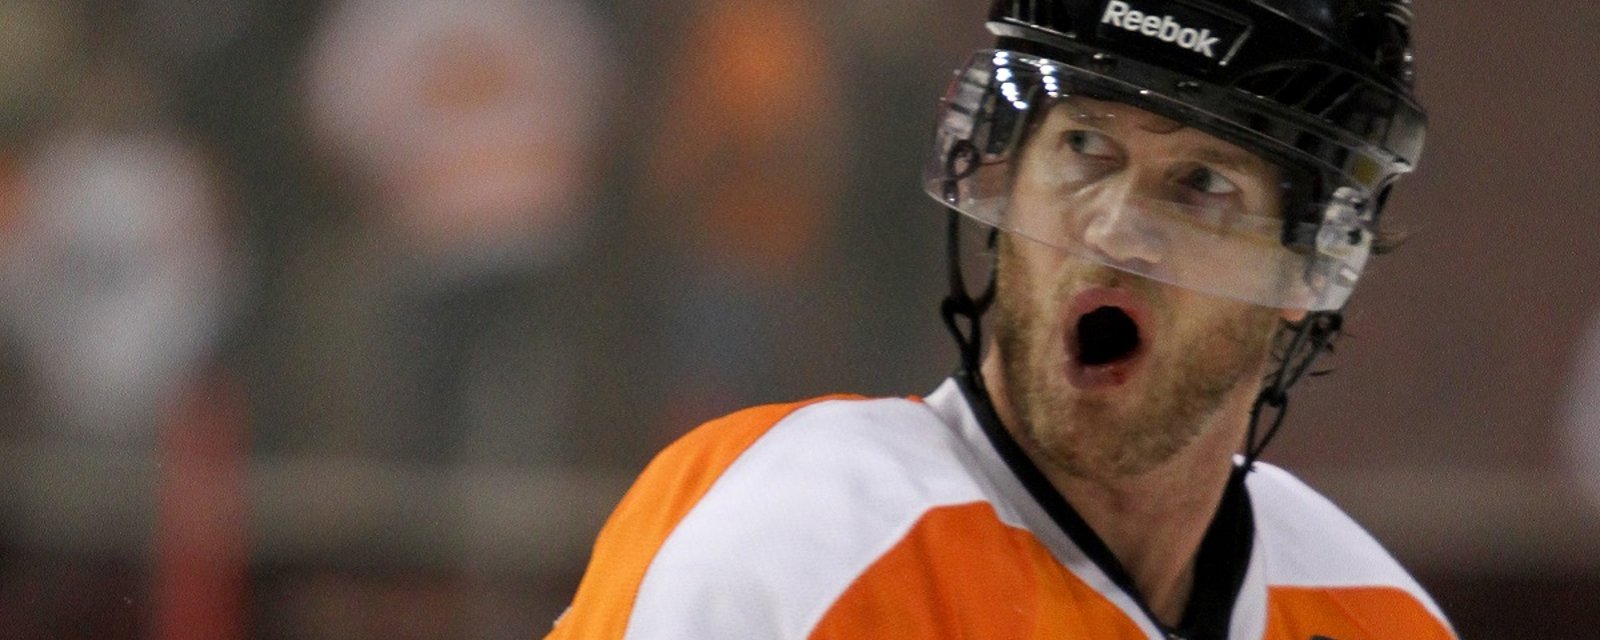 Pronger, Marchand, and others believe the Bruins have a big disadvantage.